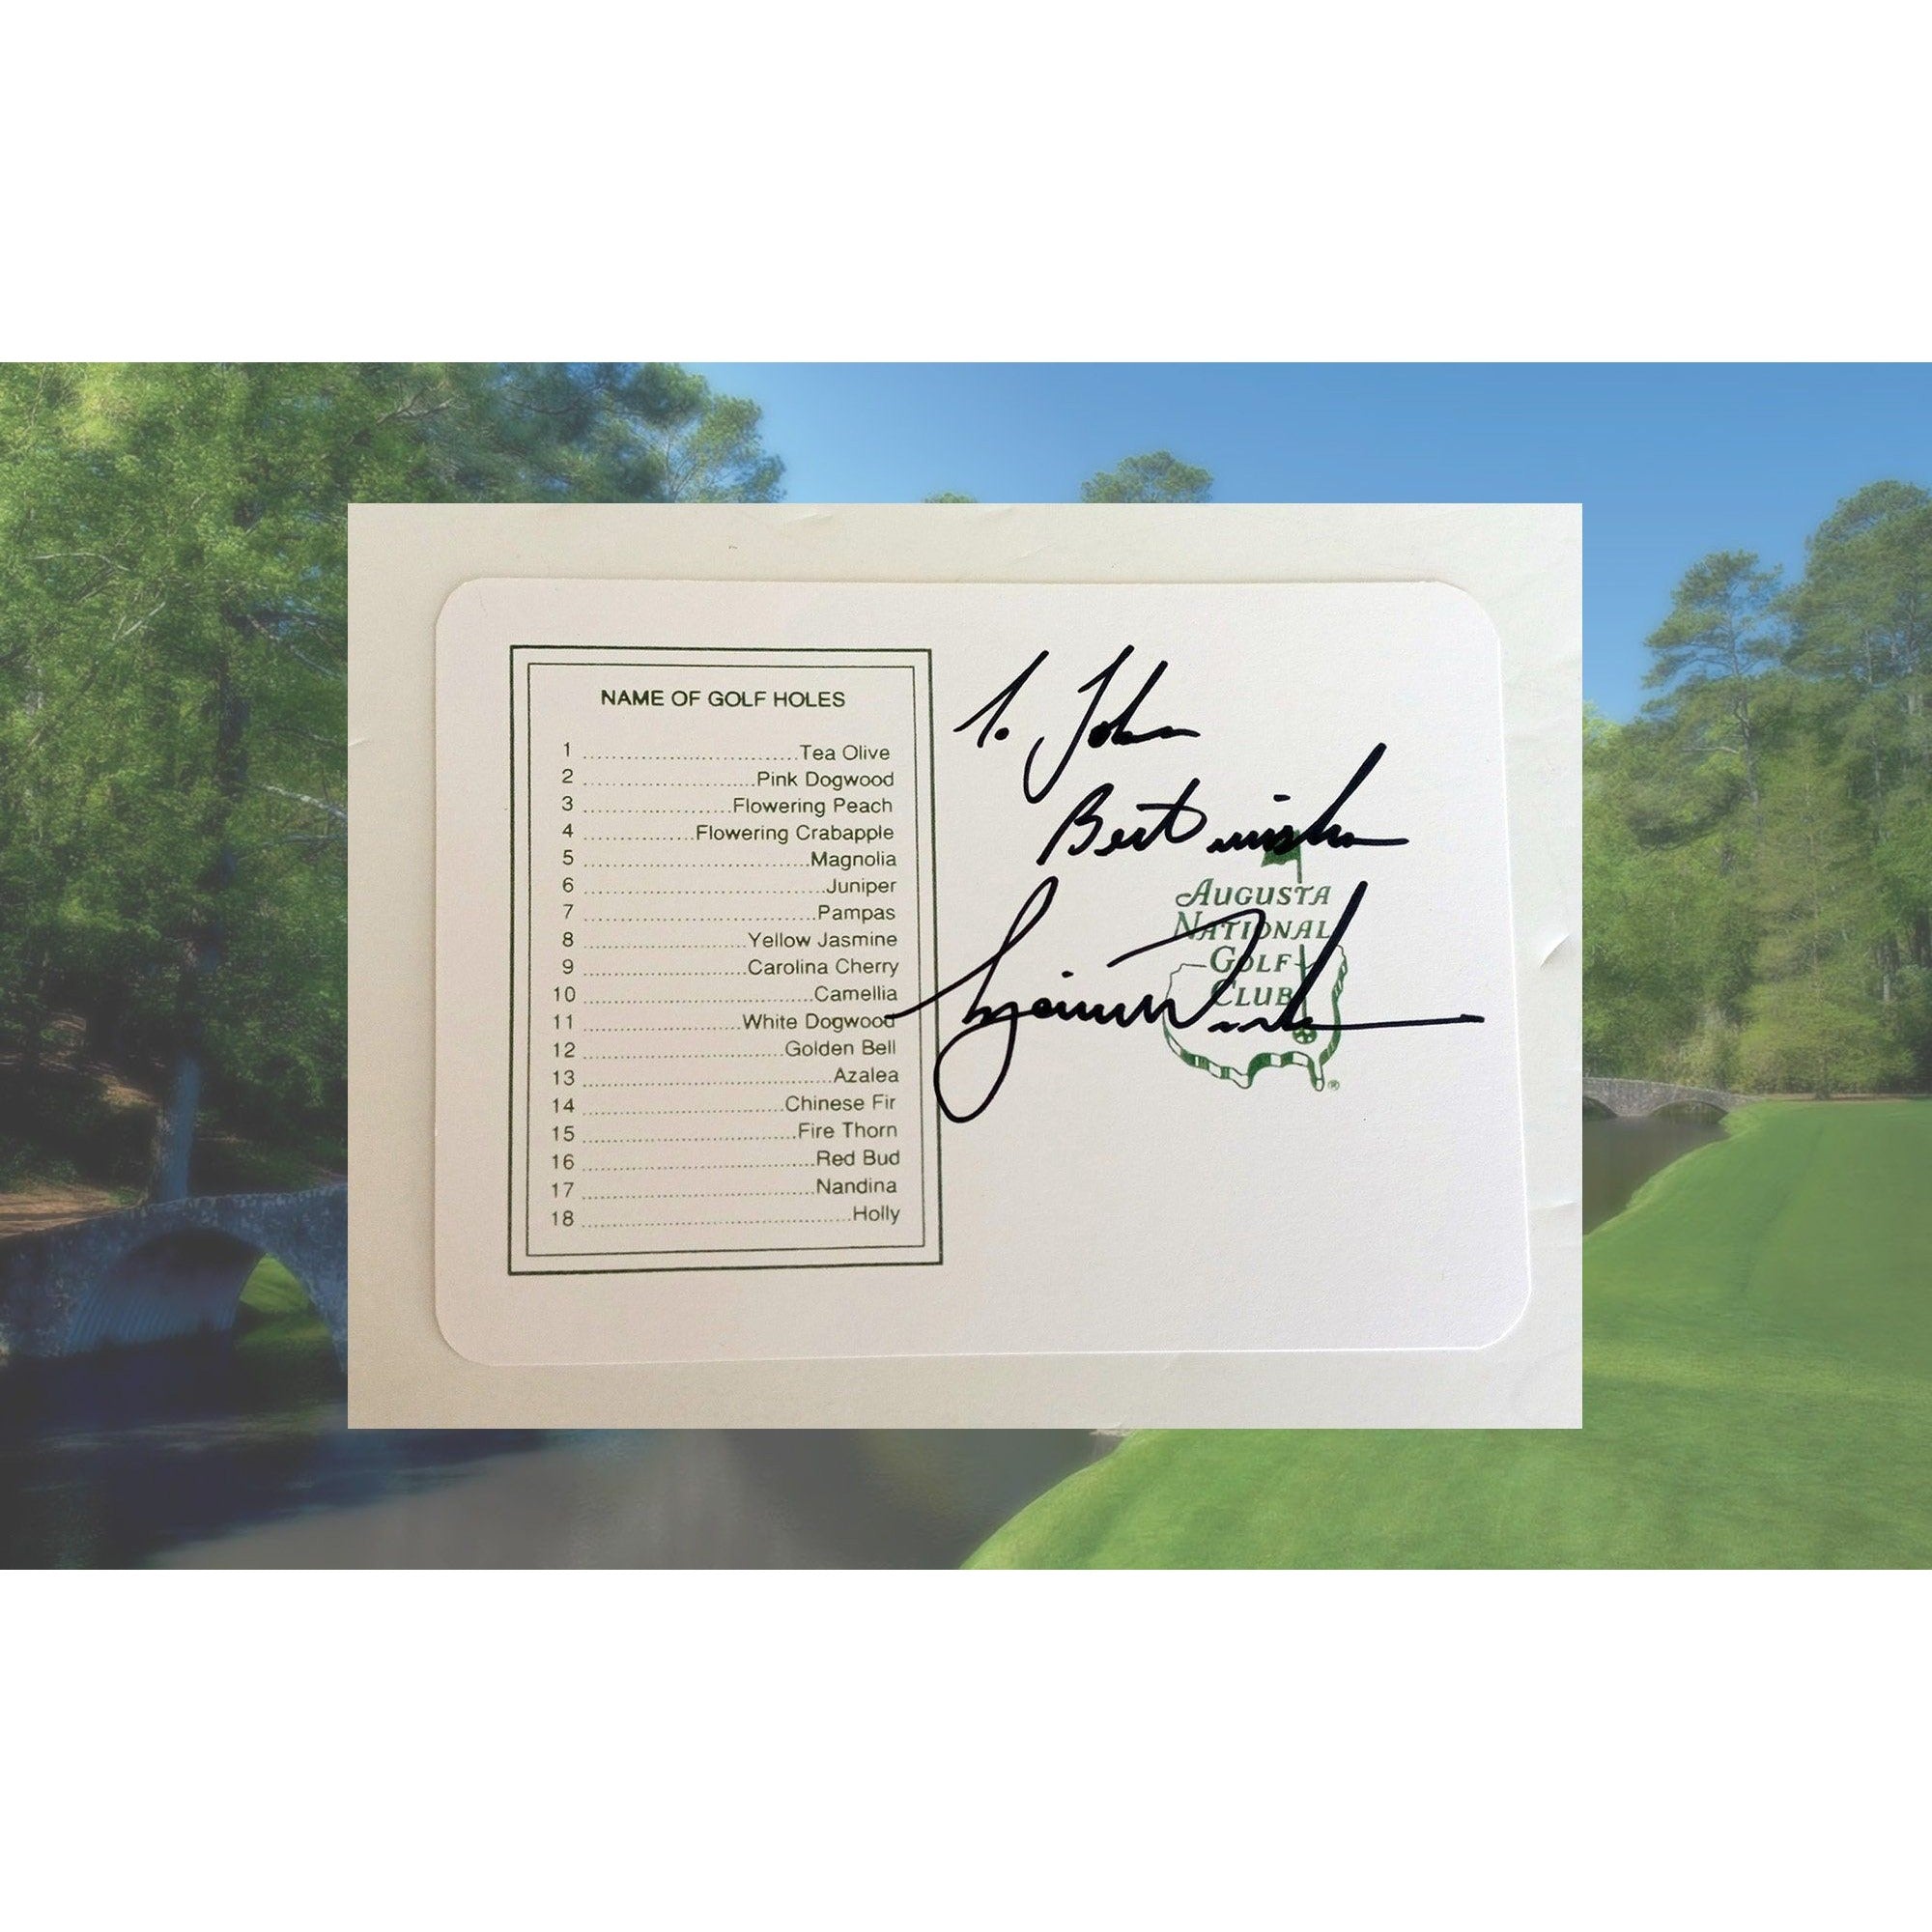 Tiger Woods Masters scorecard personalized signed to John with proof